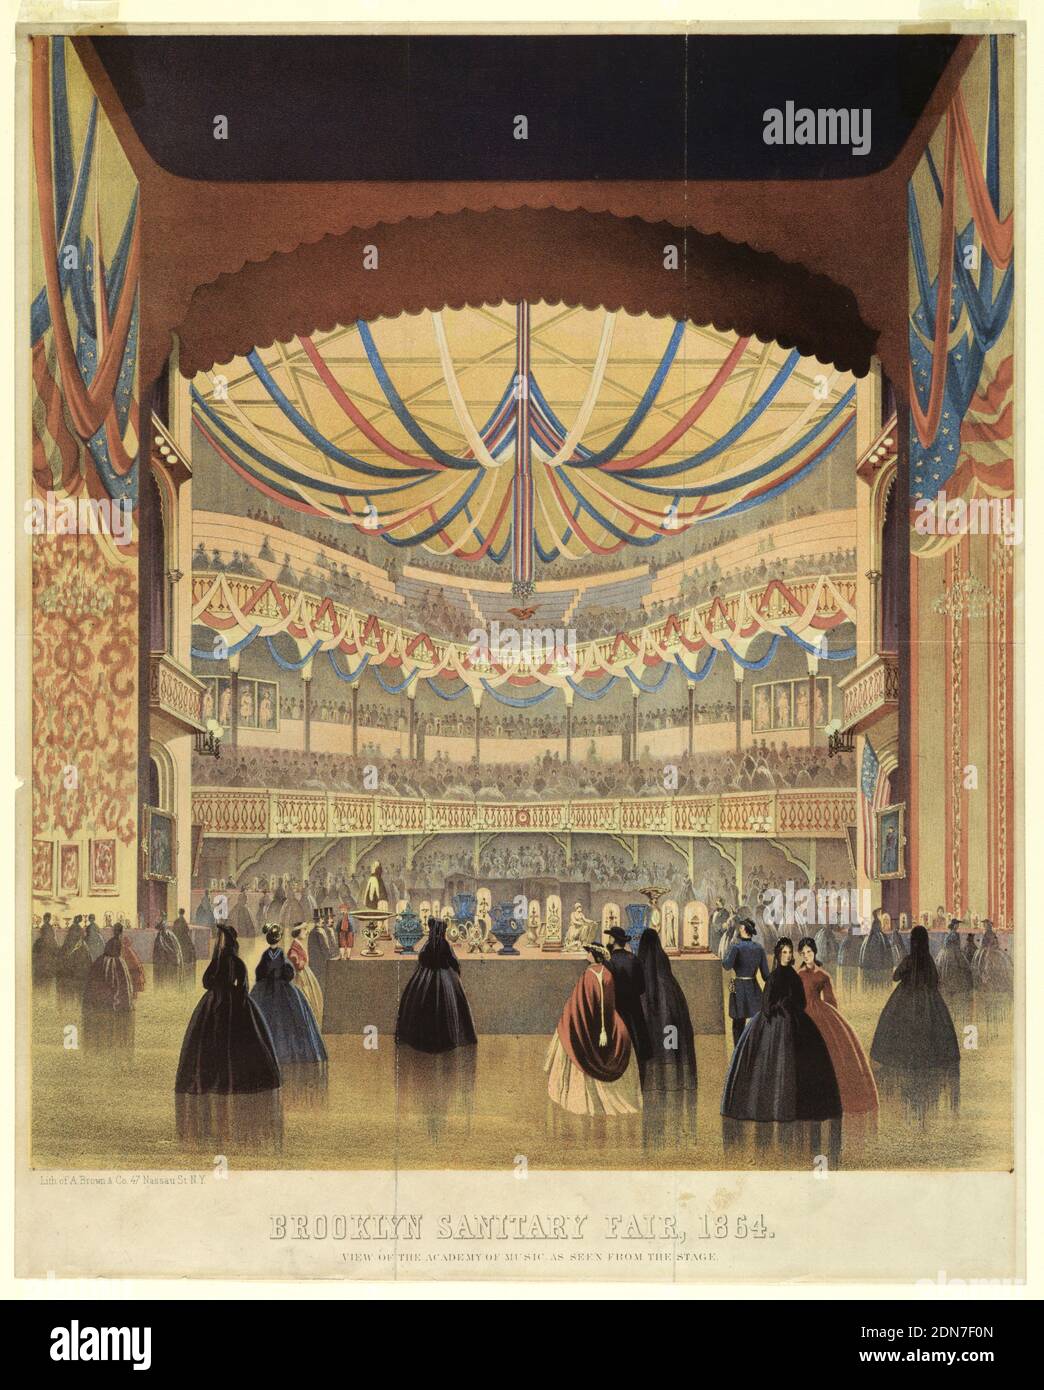 Brooklyn Sanitary Fair of 1864, the Academy of Music, A. Brown and Company, Colored inks, Vertical rectangle. View from the stage showing the display. Spectators stand in the foreground. Below: 'Brooklyn Sanitary Fair, 1864 / View of the Academy of Music as seen from the Stage.', USA, 1864, interiors, Print Stock Photo